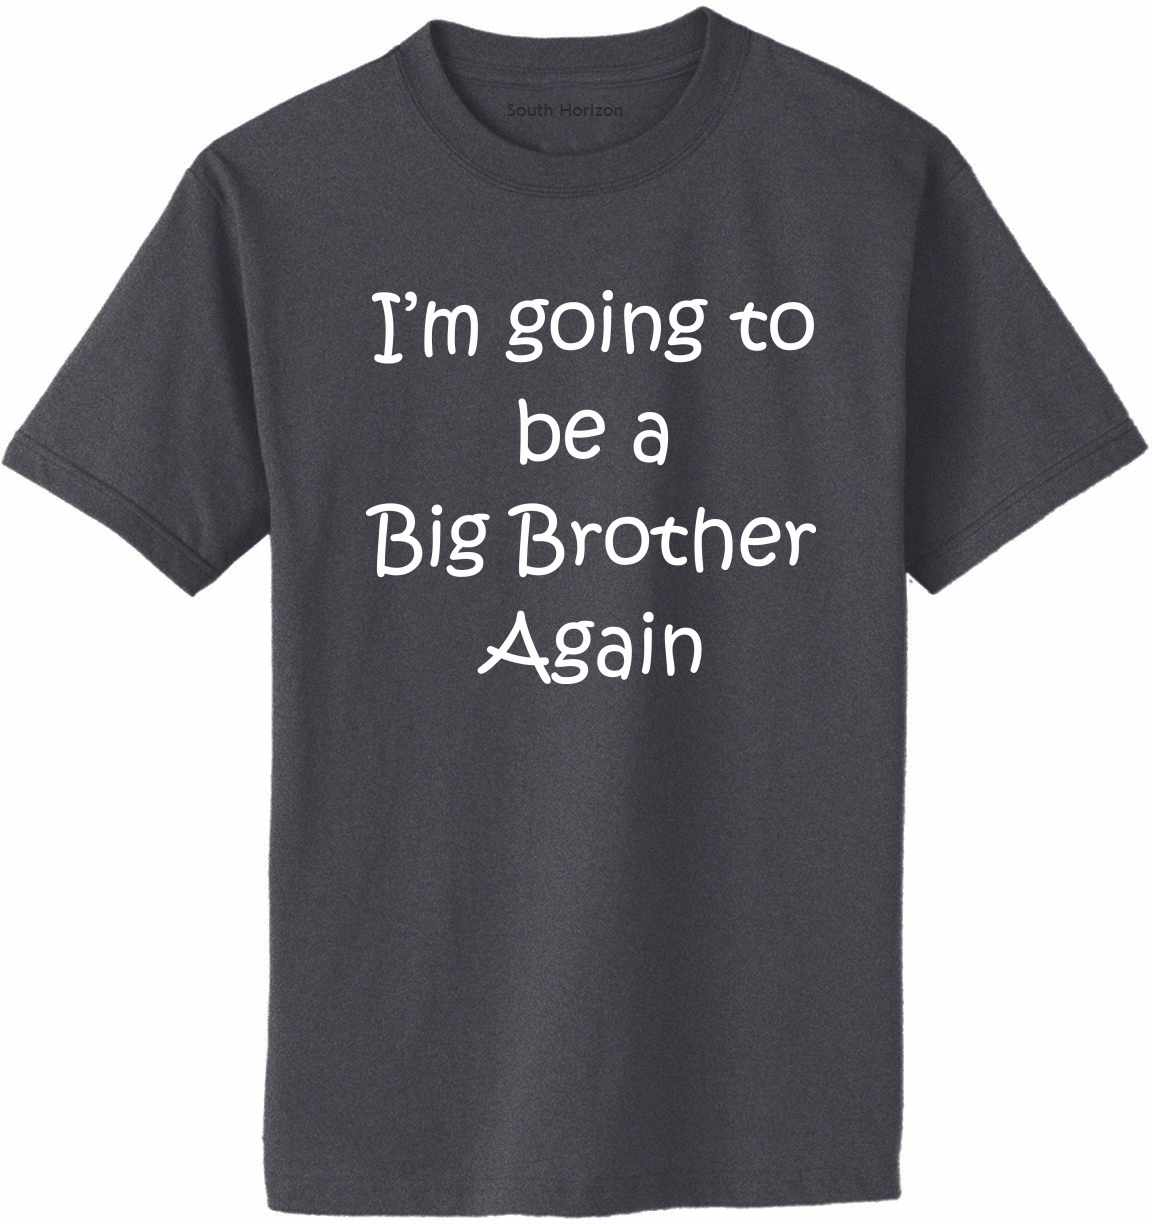 I'm Going to be a Big Brother Again Adult T-Shirt